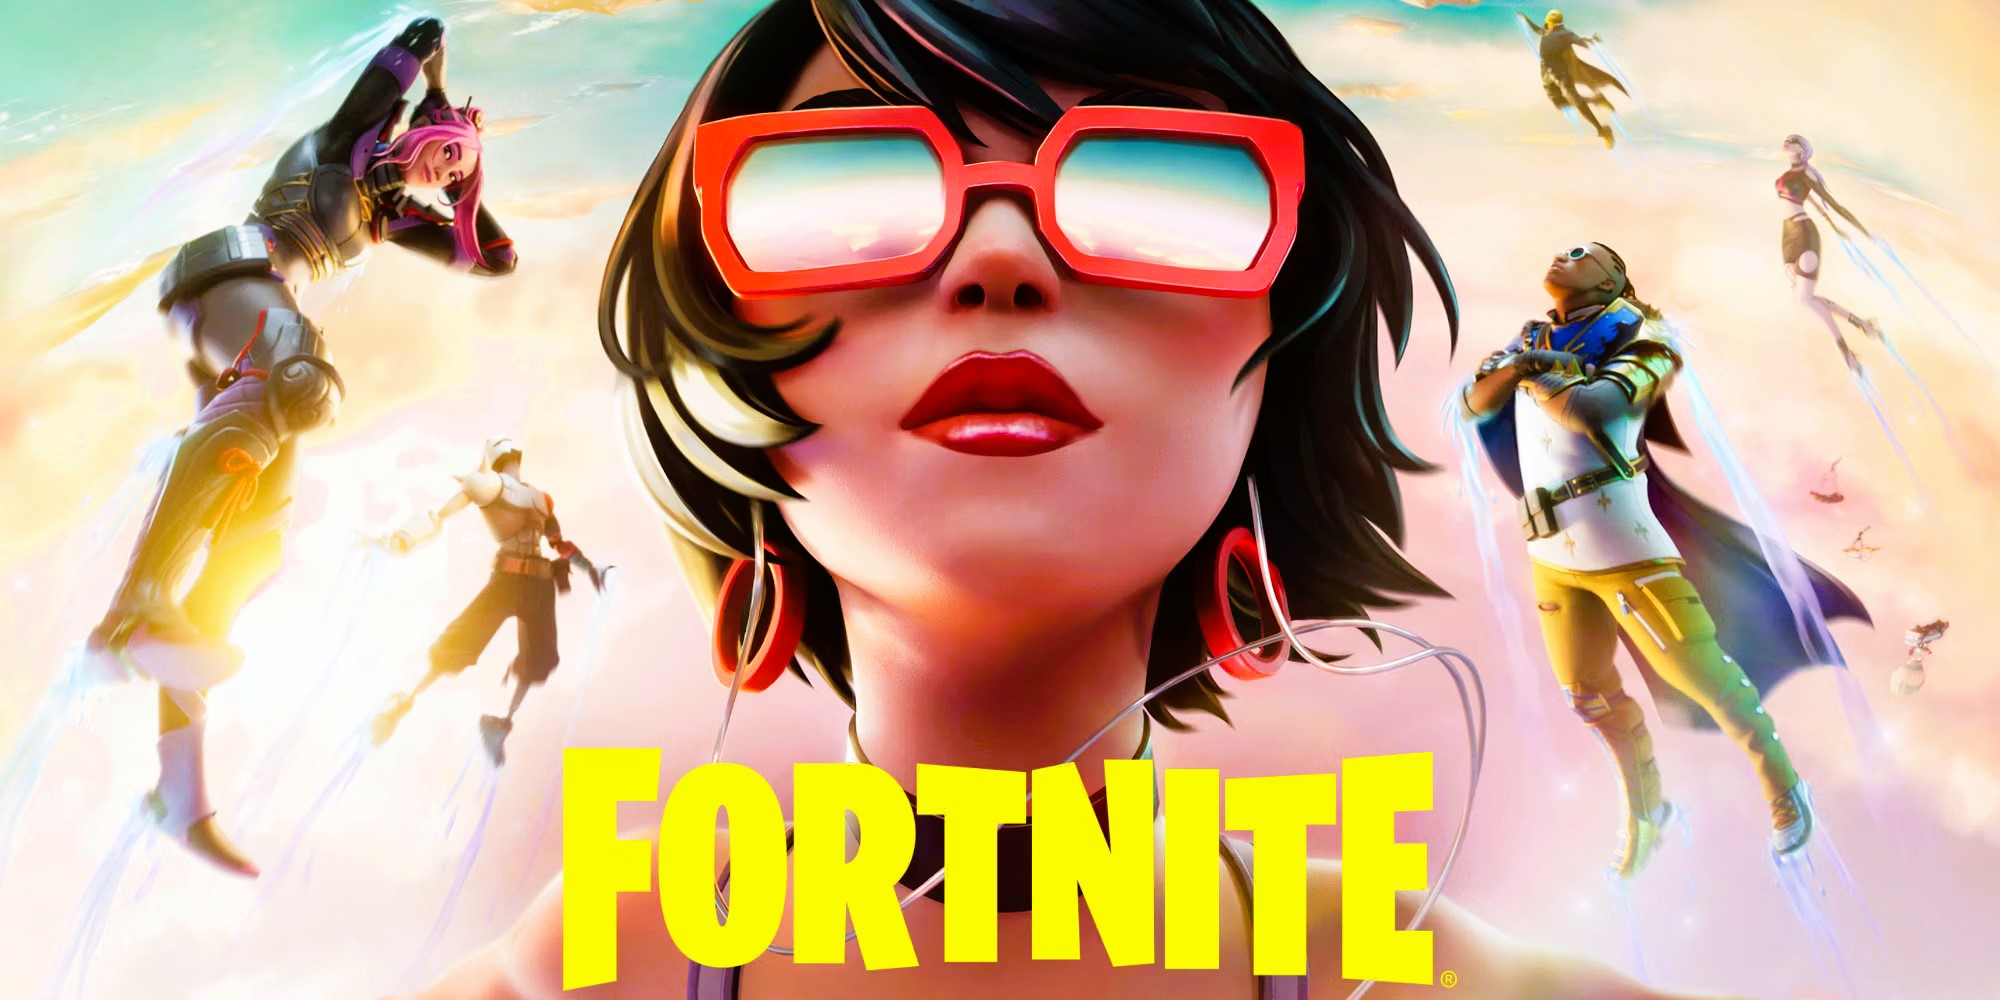 Play Fortnite on Chromebook: Step-by-Step Instructions